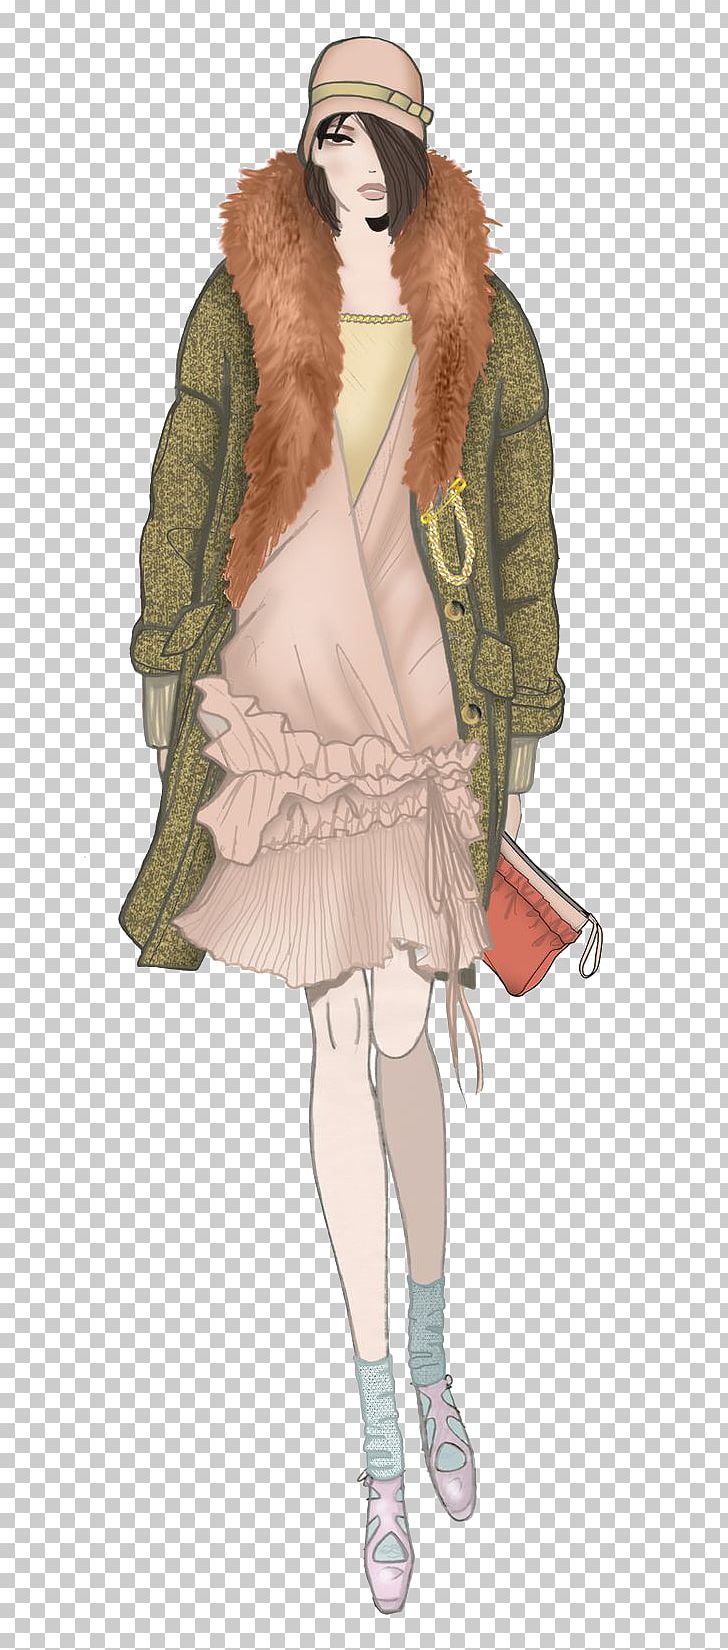 Drawing Fashion Illustration Model Illustration PNG, Clipart, Cartoon, Celebrities, Fashion, Fashion Design, Fictional Character Free PNG Download